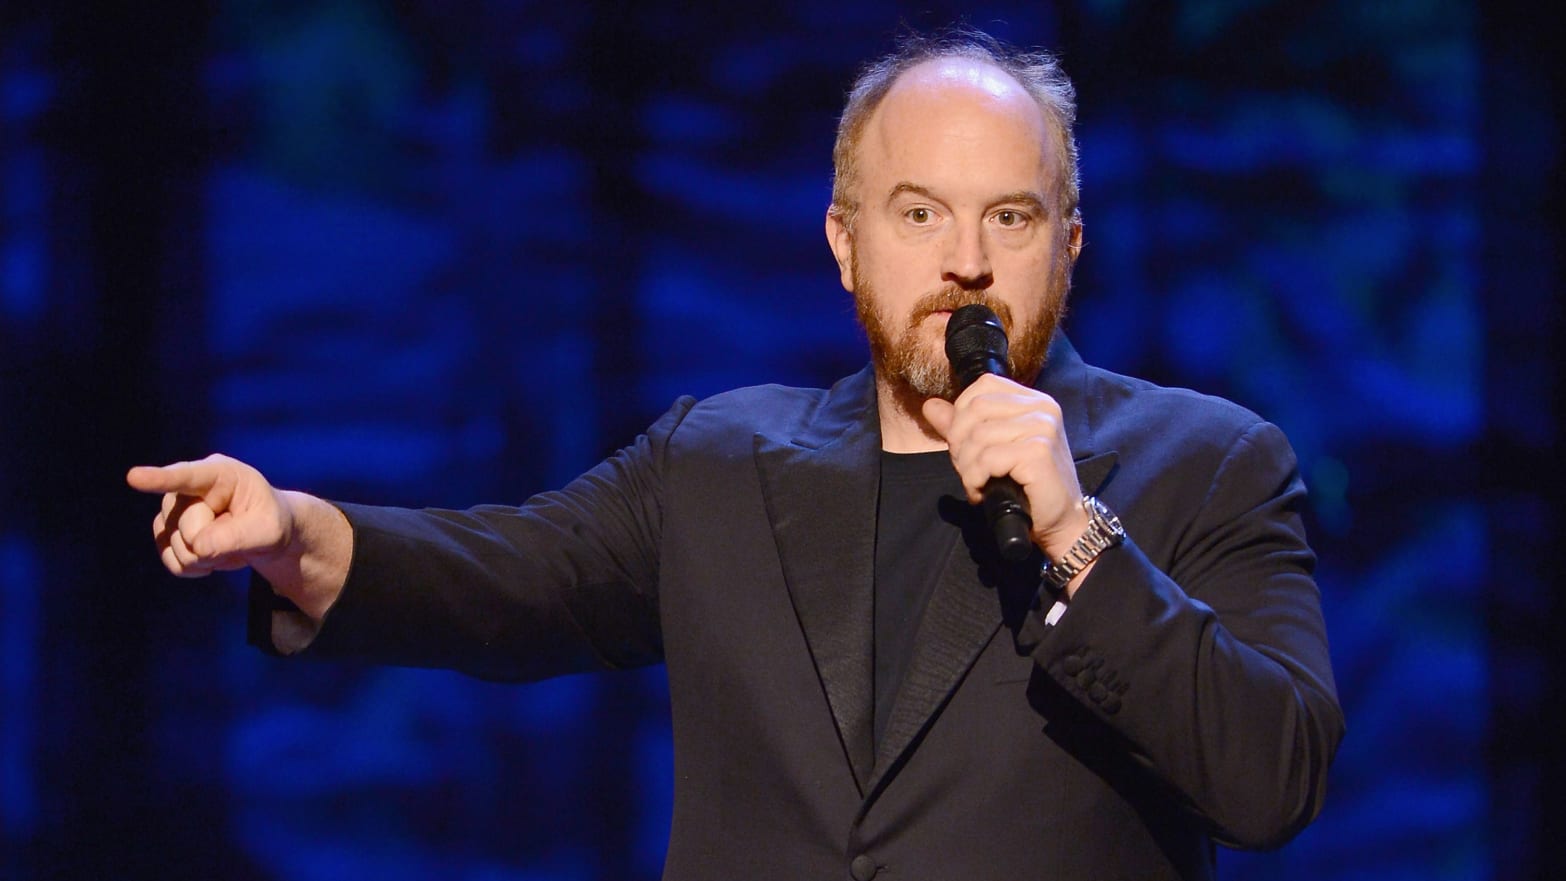 Louis C.K. Stand-Up Comedy Tour Begins in August